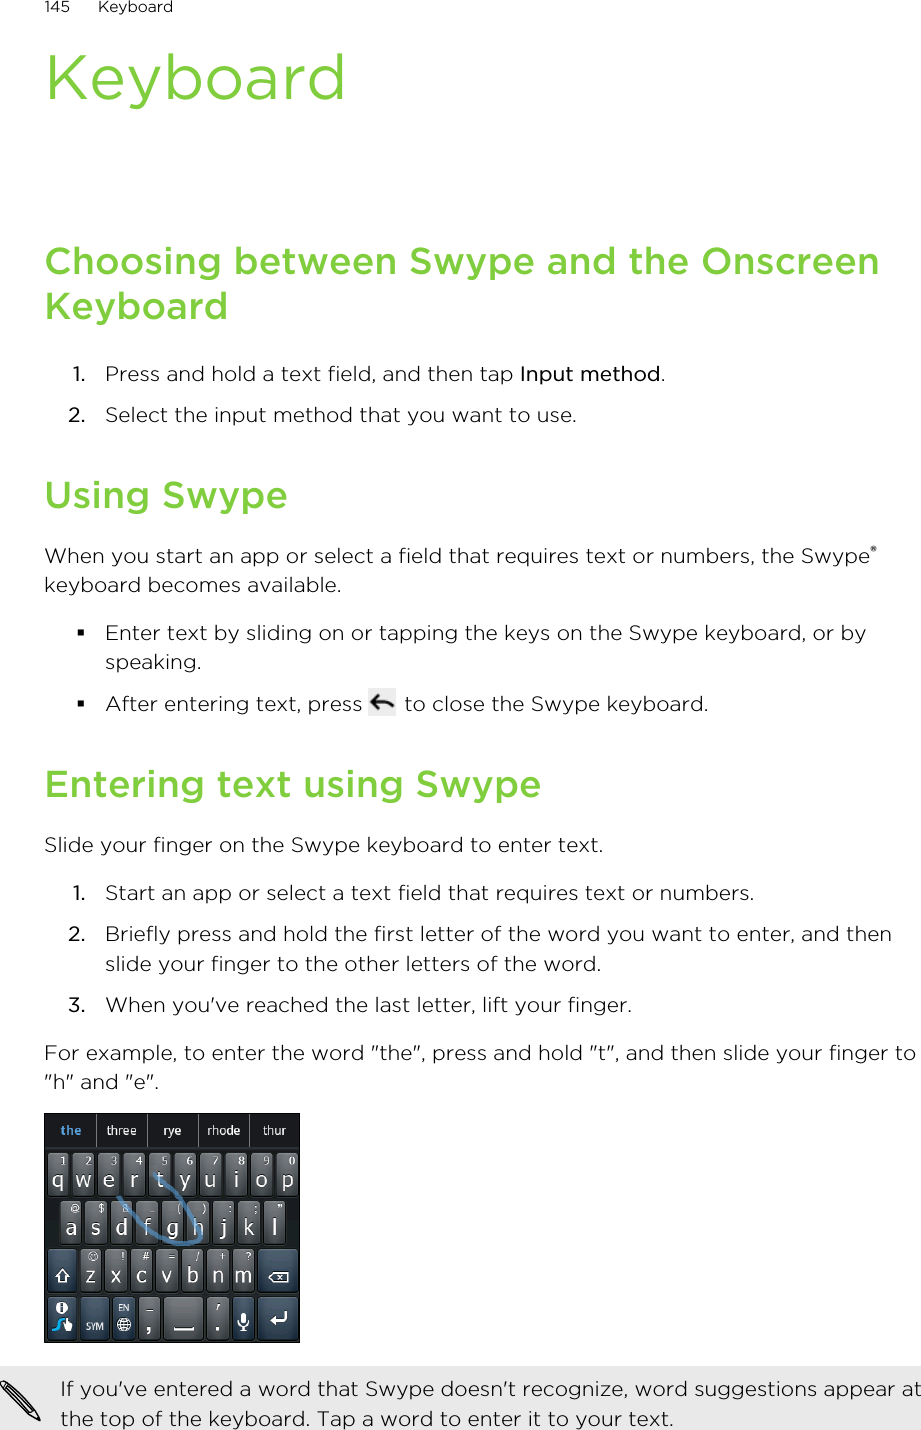 KeyboardChoosing between Swype and the OnscreenKeyboard1. Press and hold a text field, and then tap Input method.2. Select the input method that you want to use.Using SwypeWhen you start an app or select a field that requires text or numbers, the Swype®keyboard becomes available.§Enter text by sliding on or tapping the keys on the Swype keyboard, or byspeaking.§After entering text, press   to close the Swype keyboard.Entering text using SwypeSlide your finger on the Swype keyboard to enter text.1. Start an app or select a text field that requires text or numbers.2. Briefly press and hold the first letter of the word you want to enter, and thenslide your finger to the other letters of the word.3. When you&apos;ve reached the last letter, lift your finger.For example, to enter the word &quot;the&quot;, press and hold &quot;t&quot;, and then slide your finger to&quot;h&quot; and &quot;e&quot;.If you&apos;ve entered a word that Swype doesn&apos;t recognize, word suggestions appear atthe top of the keyboard. Tap a word to enter it to your text.145 Keyboard